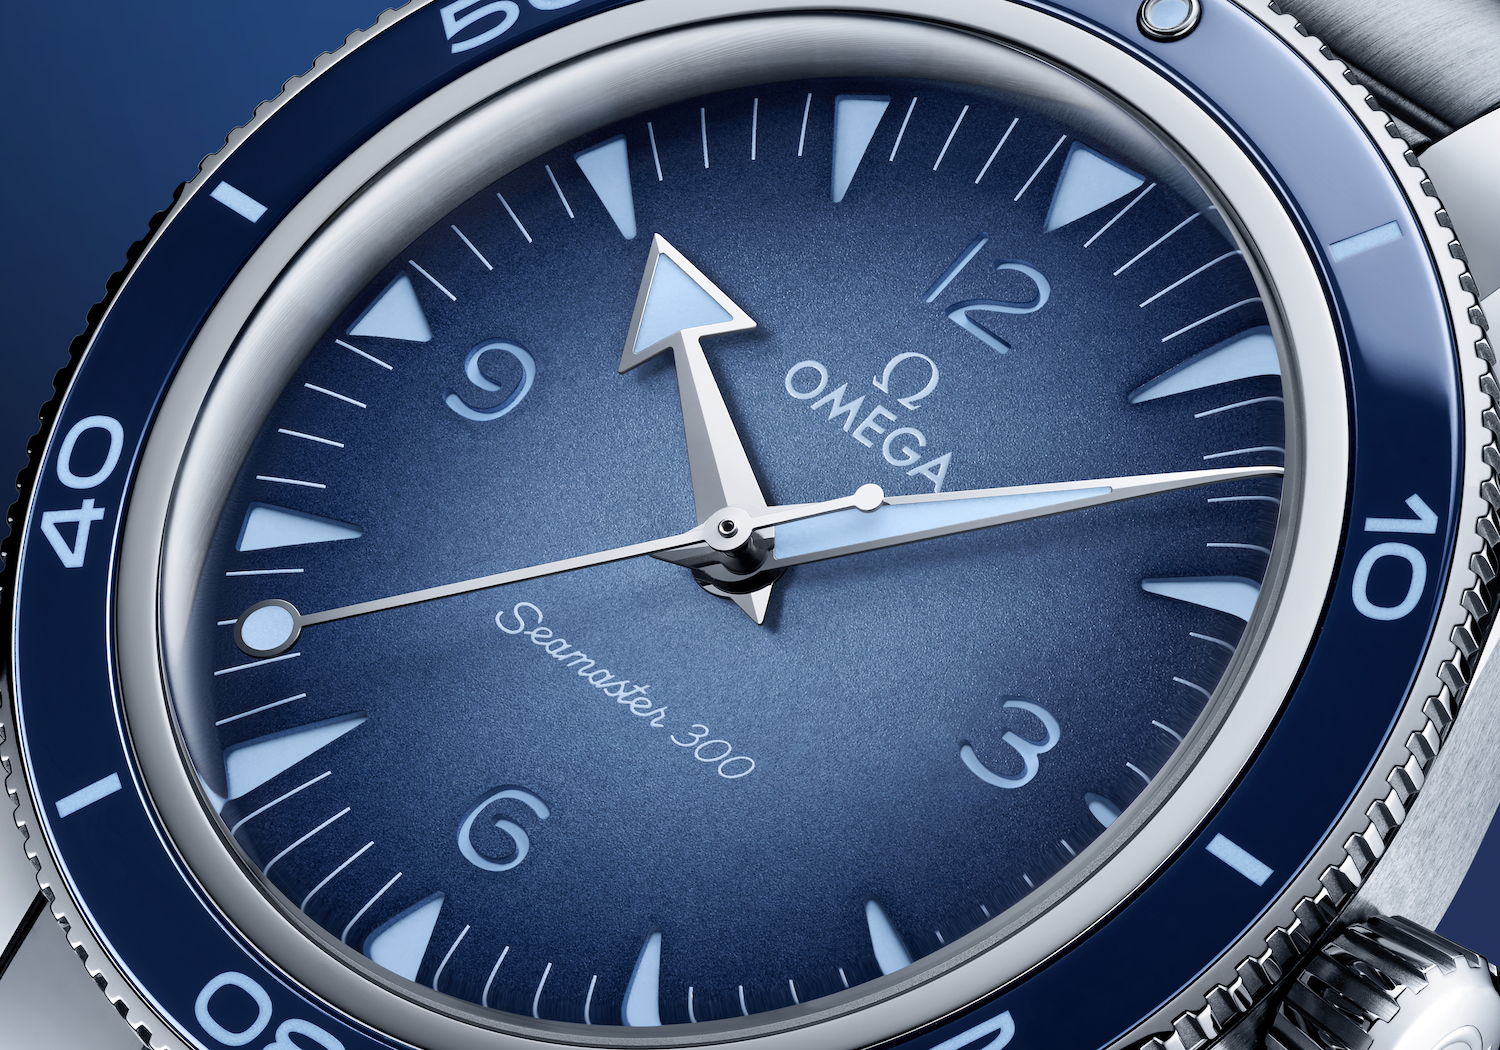 Up-close shot of watch face that's silver and blue.